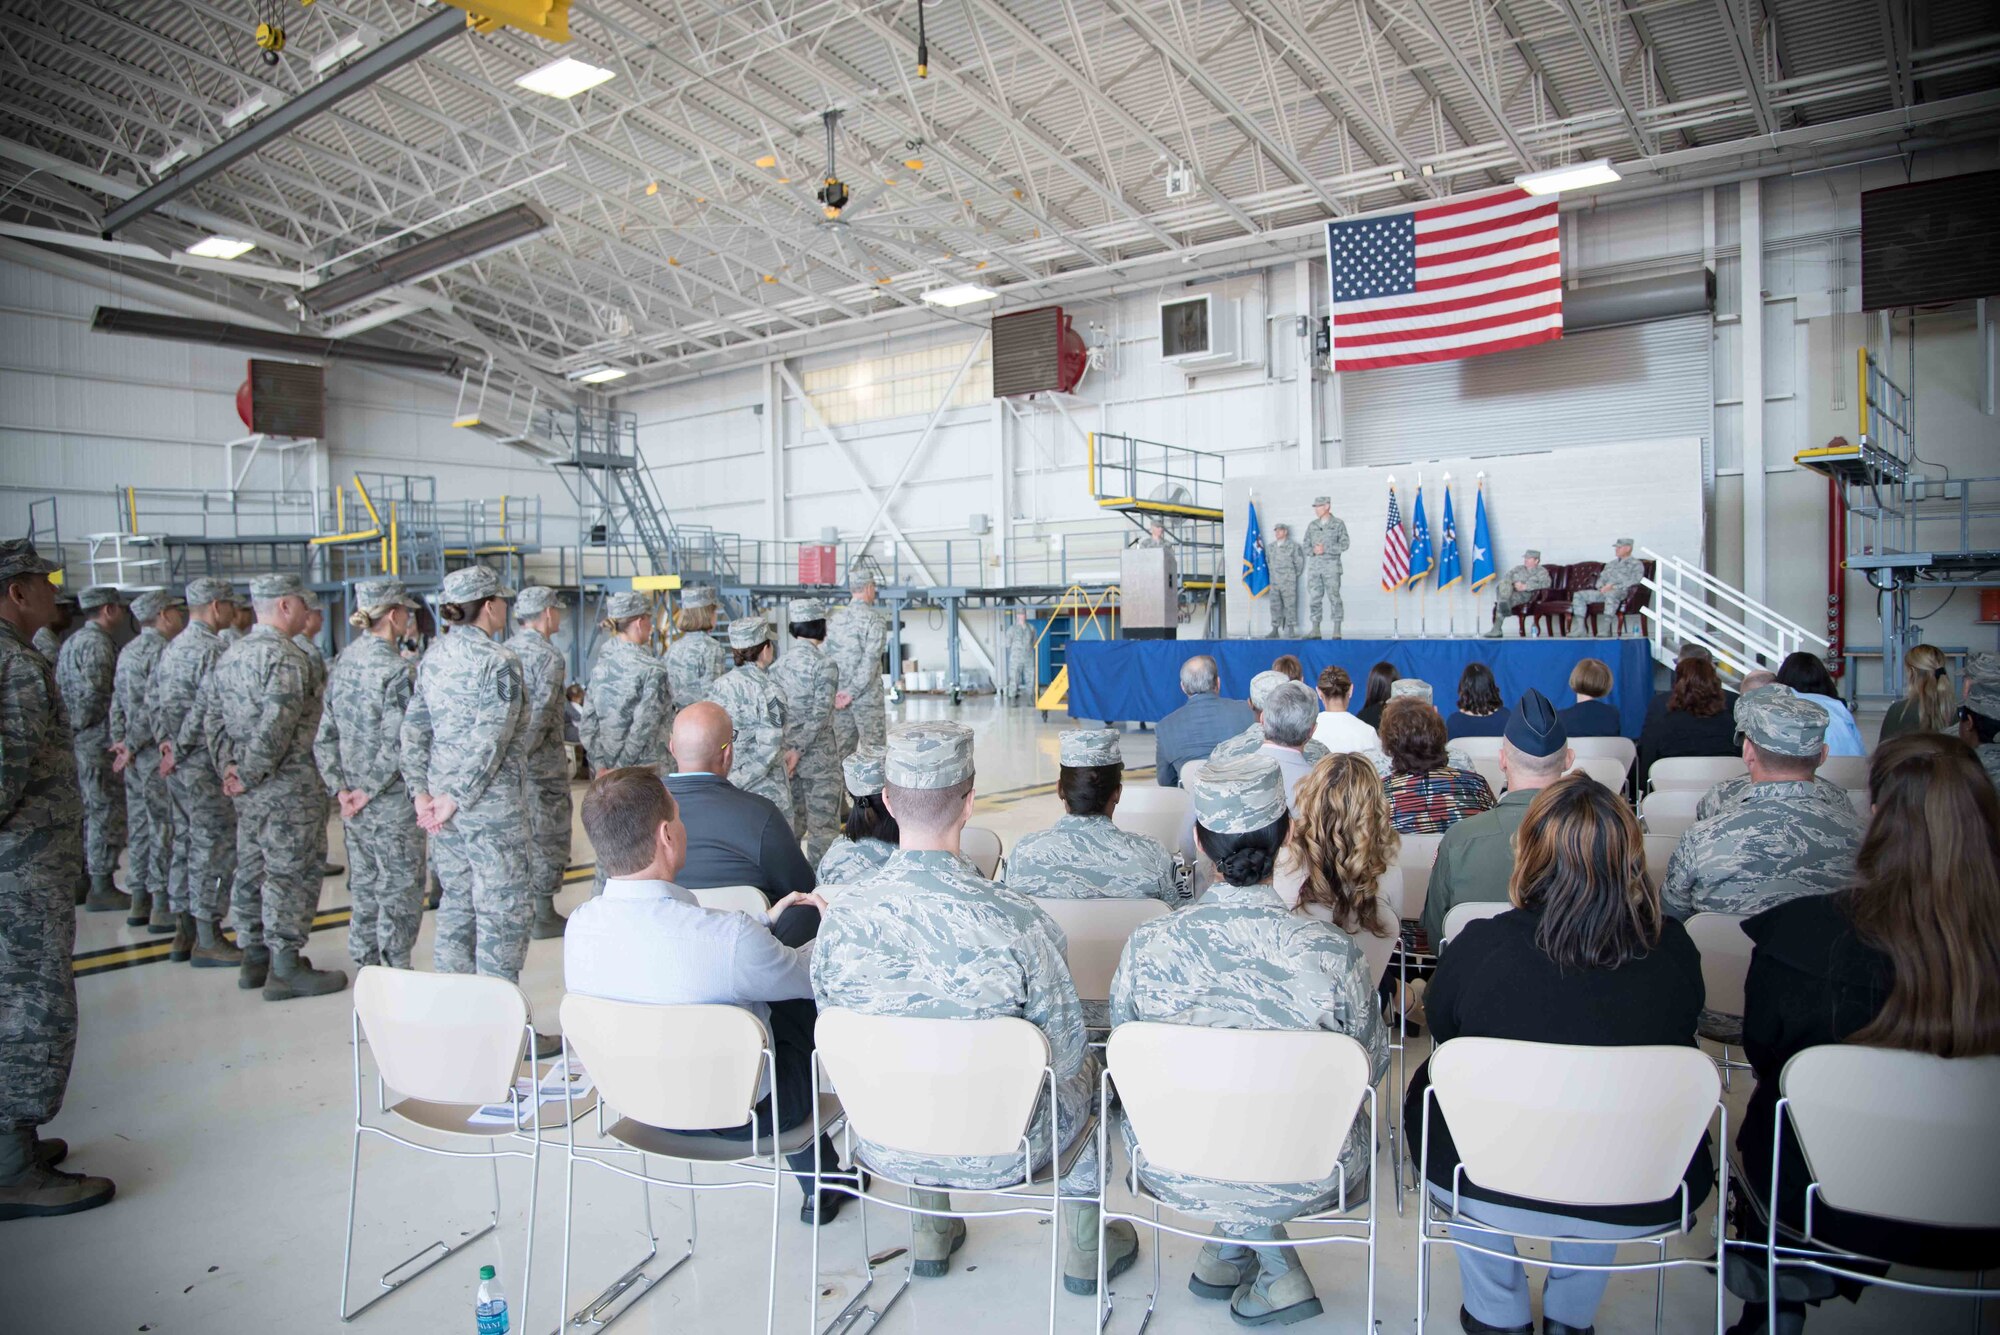 Maj. Gen. Craig La Fave, 22nd Air Force commander, speaks to the audience during his change of command ceremony Nov. 14,1017 at Keesler Air Force Base, Mississippi (U.S. Air Force photo by Maj. Marnee A.C. Losurdo)